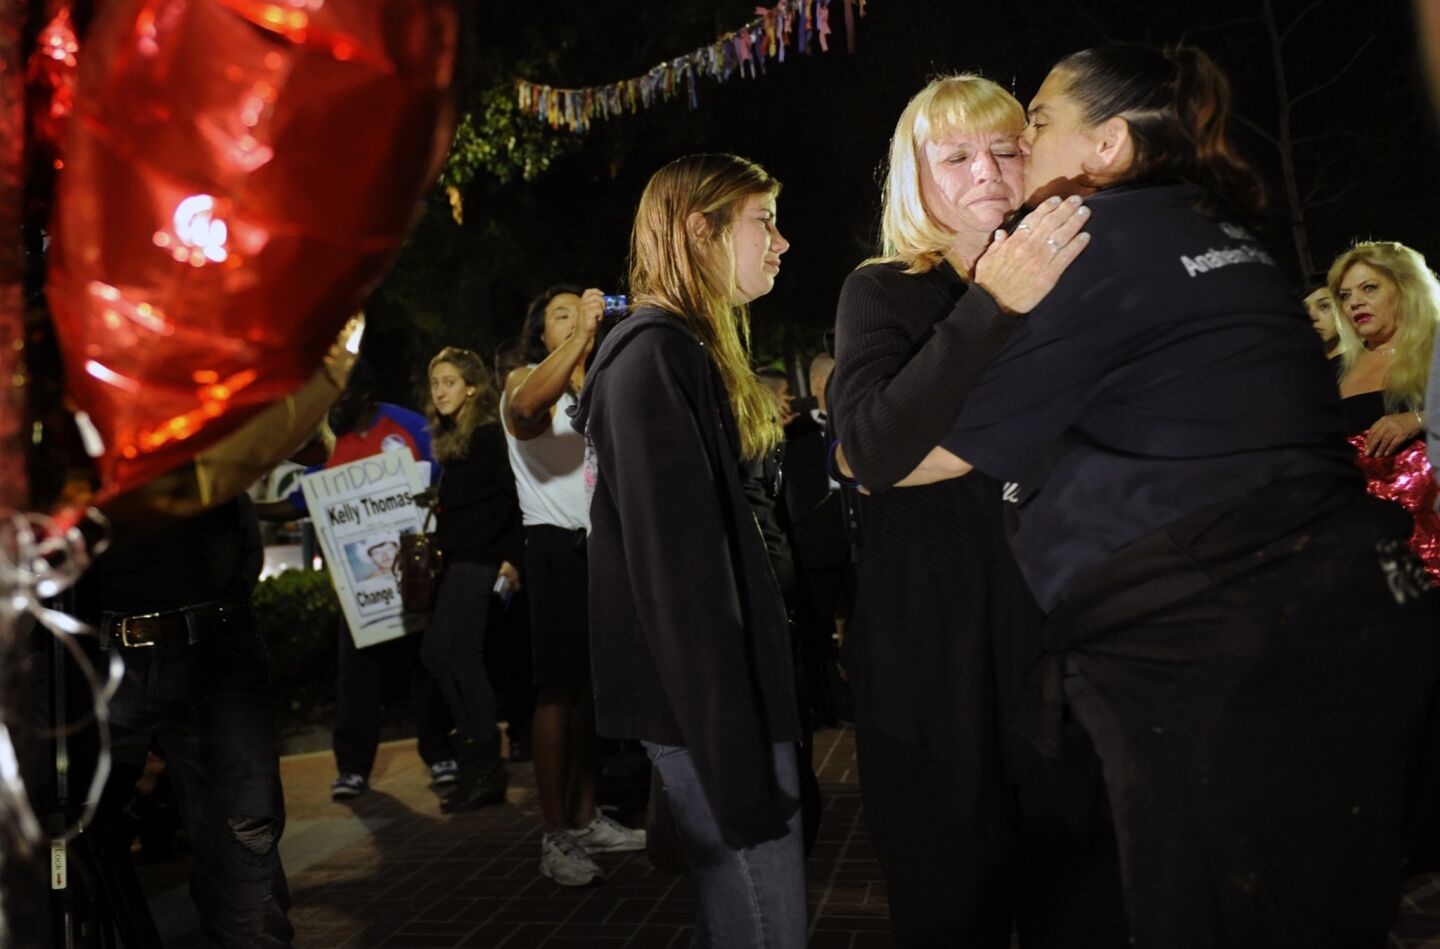 Kathy Thomas, mother of Kelly Thomas, receives a hug from a supporter in front of a memorial at "Kelly's Corner."